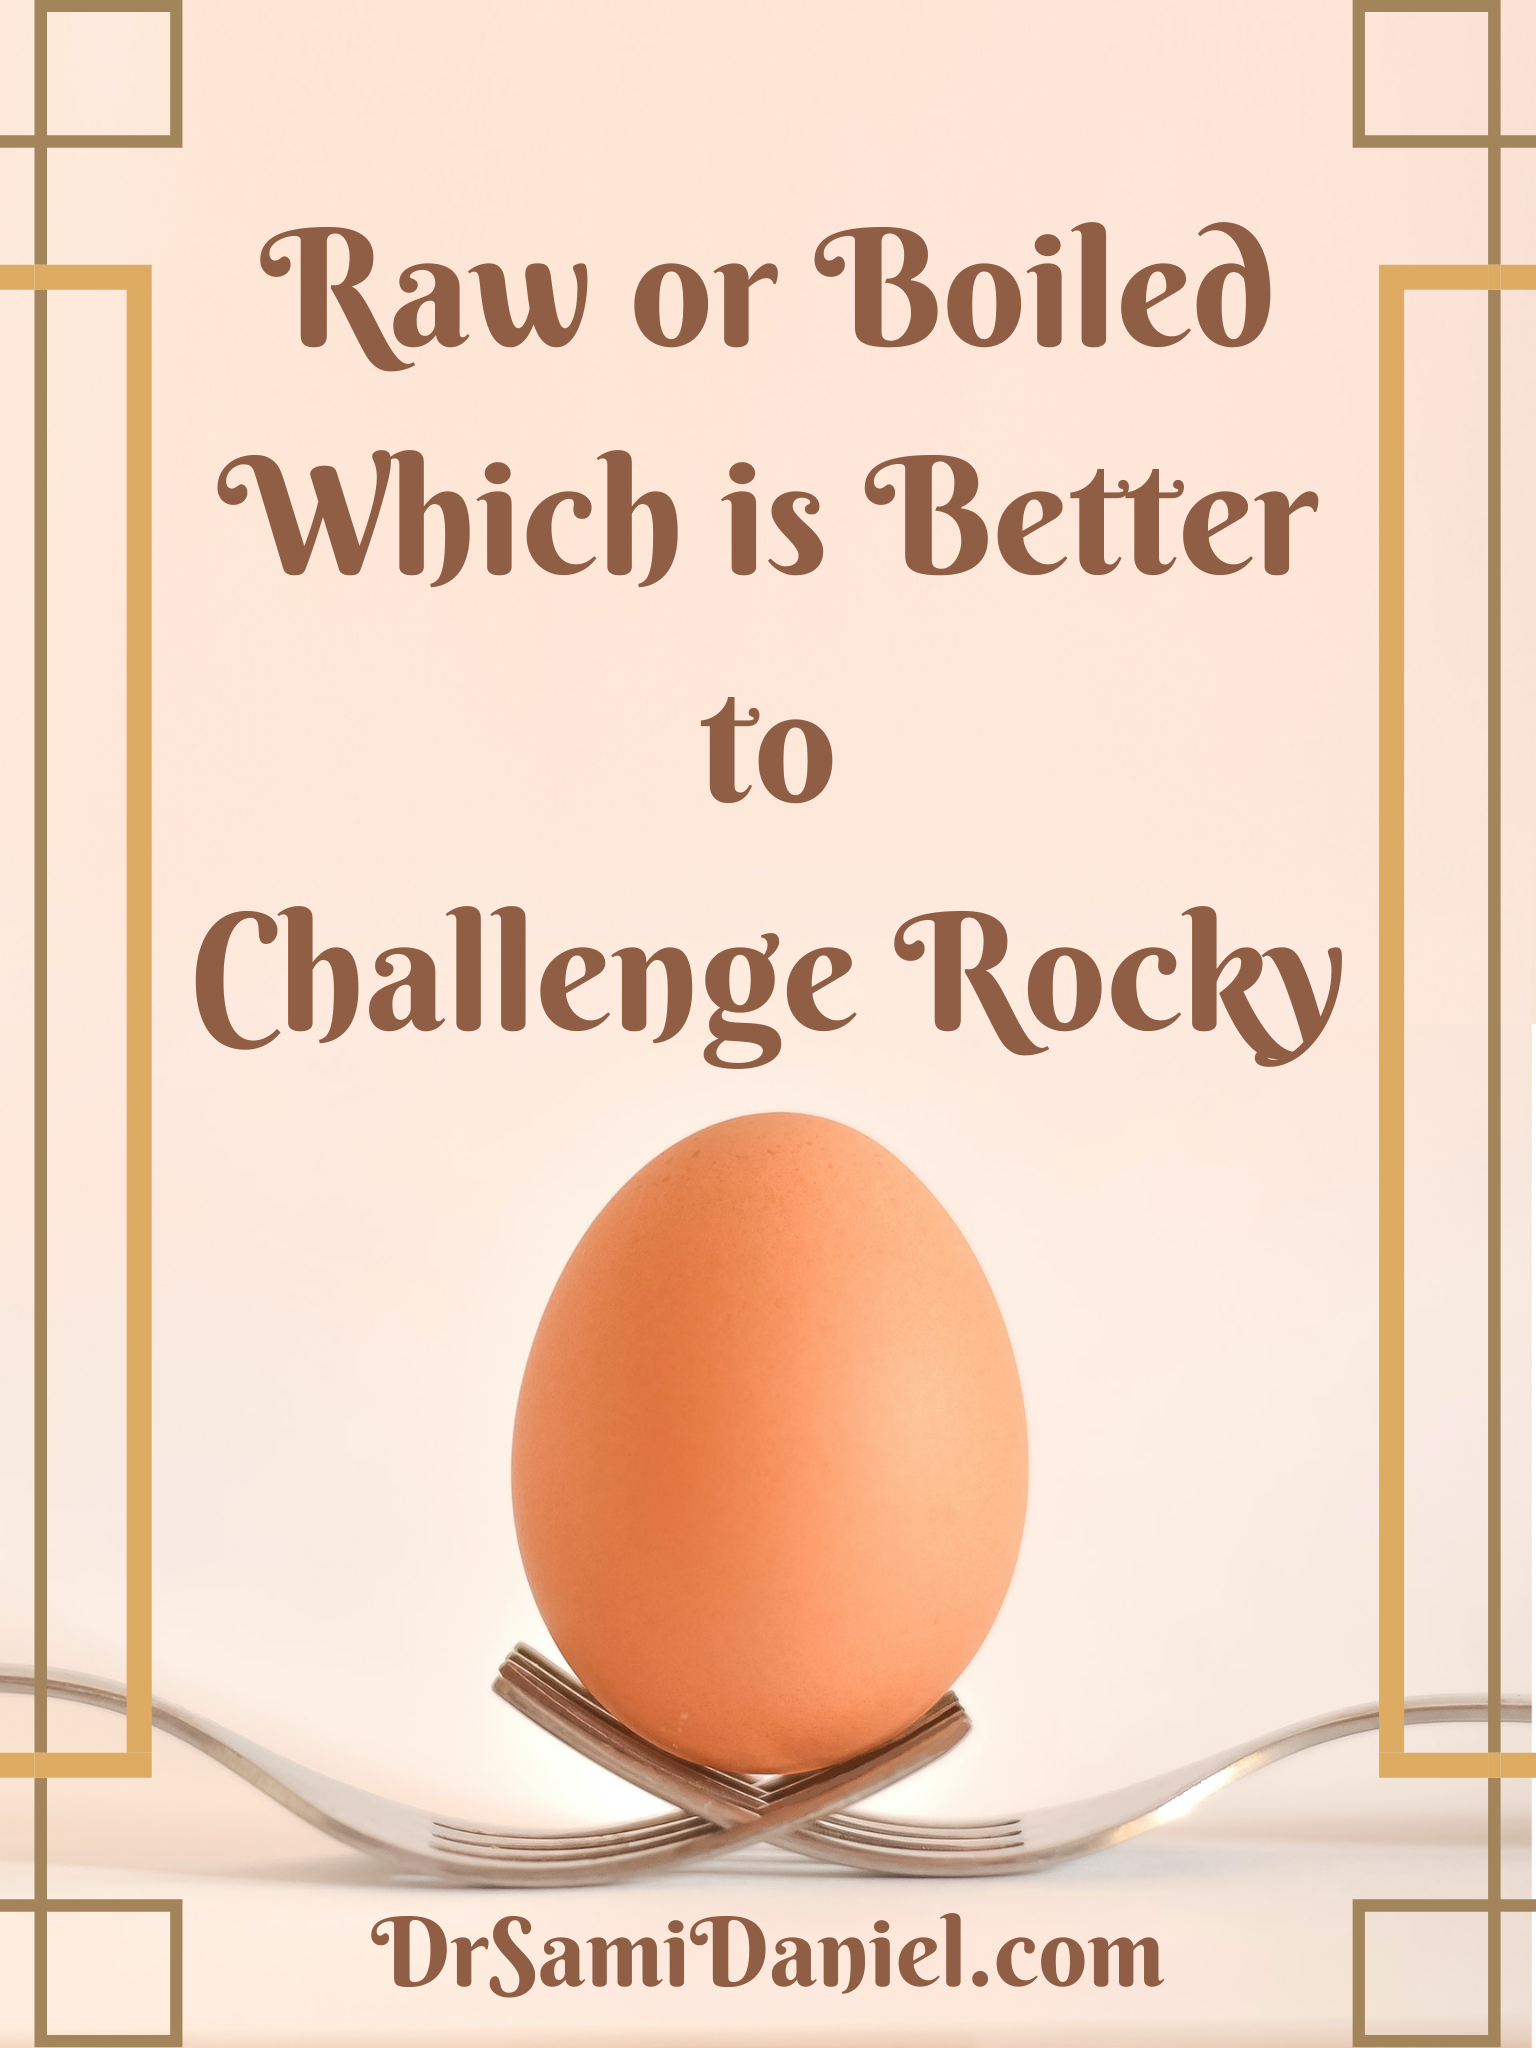 Raw eggs or boiled eggs: Which is better to challenge Rocky